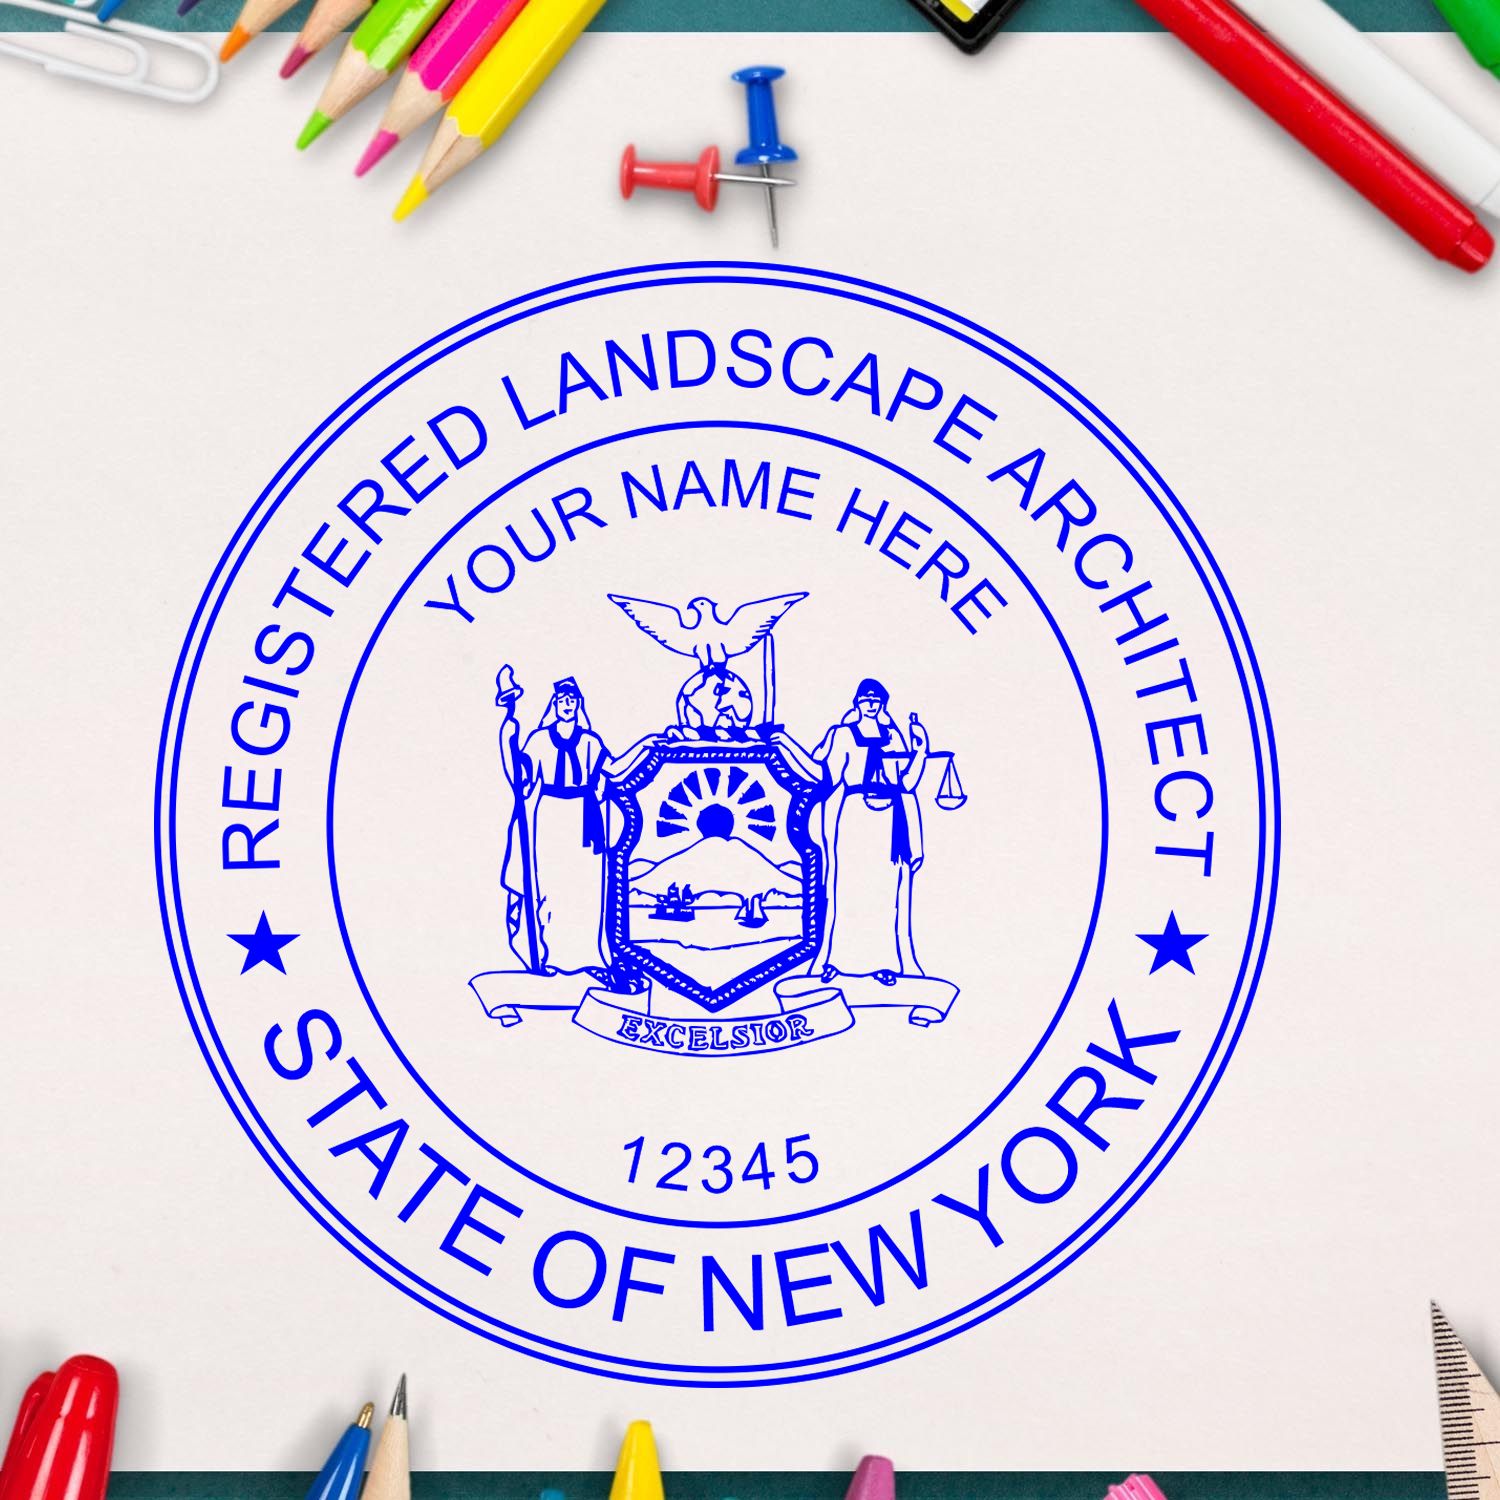 New York Landscape Architectural Seal Stamp in use photo showing a stamped imprint of the New York Landscape Architectural Seal Stamp